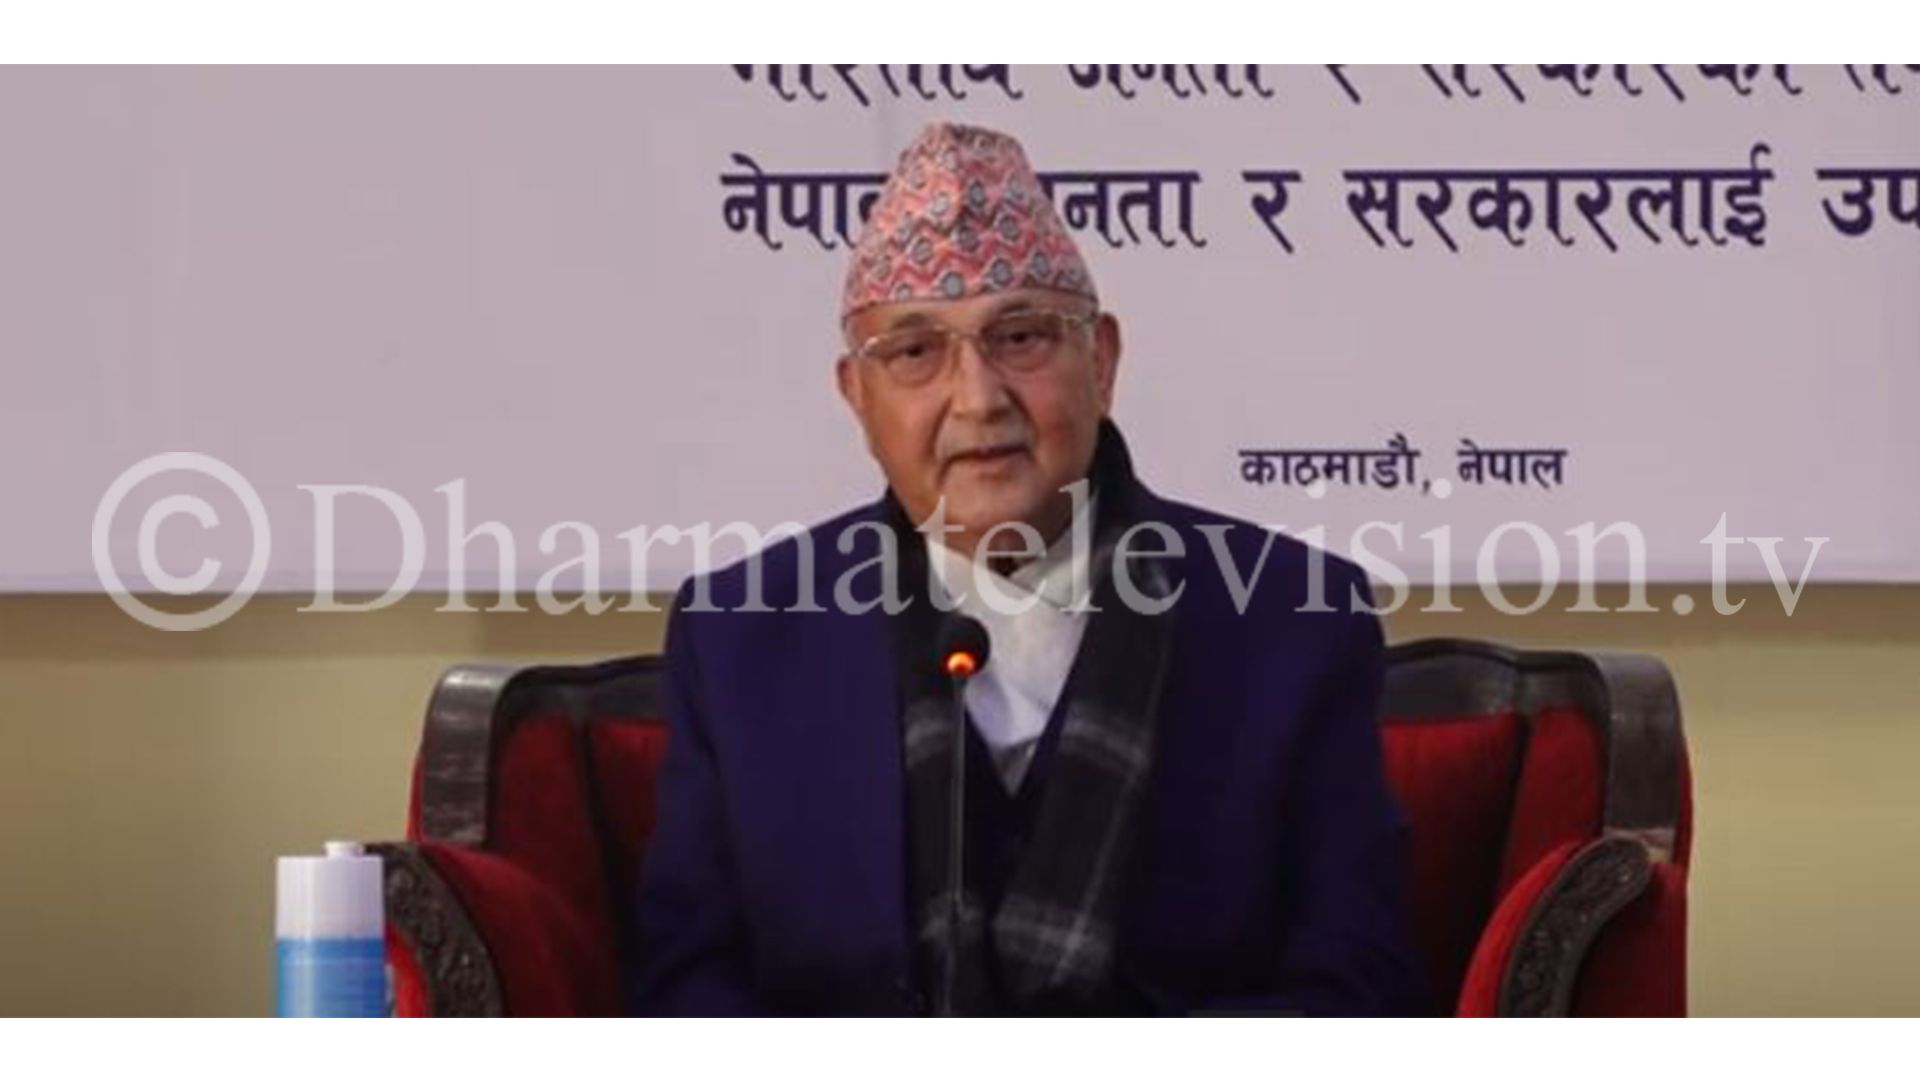 We will resolve the issue soon through talks with Chand’s group: PM Oli